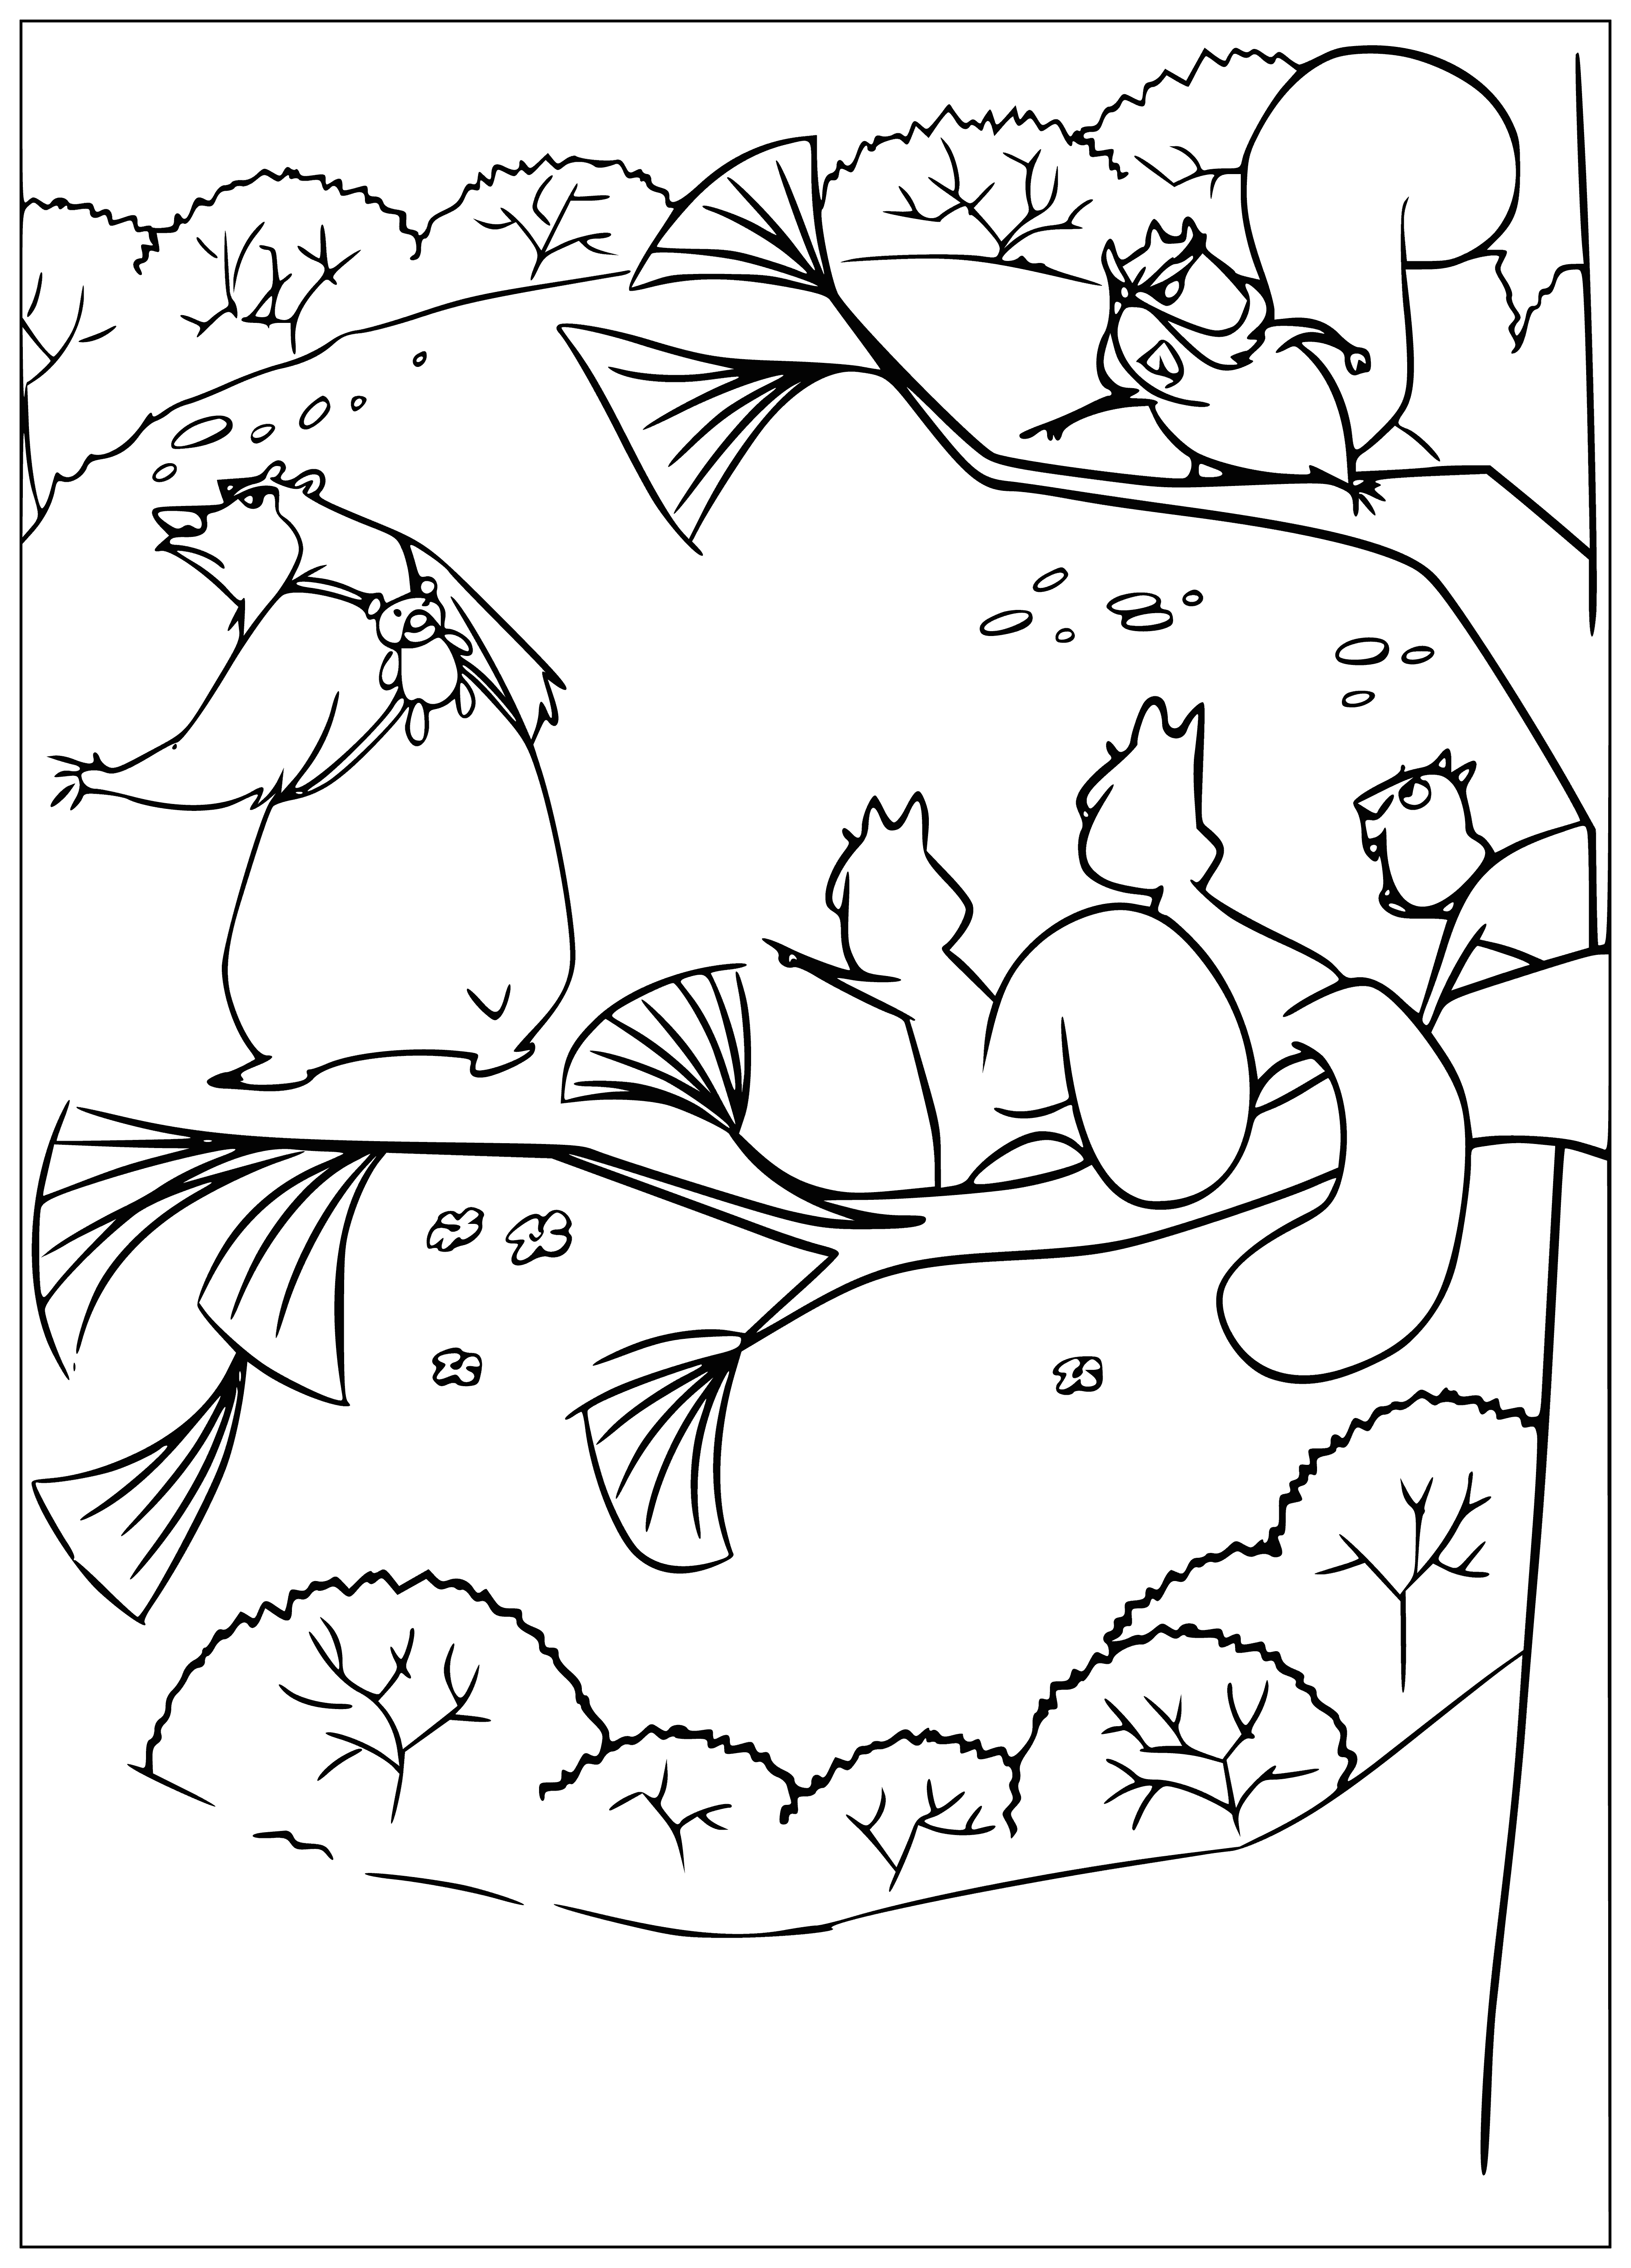 coloring page: Squirrel holds a nut while a bear stands on hind legs, tongue out, in front.